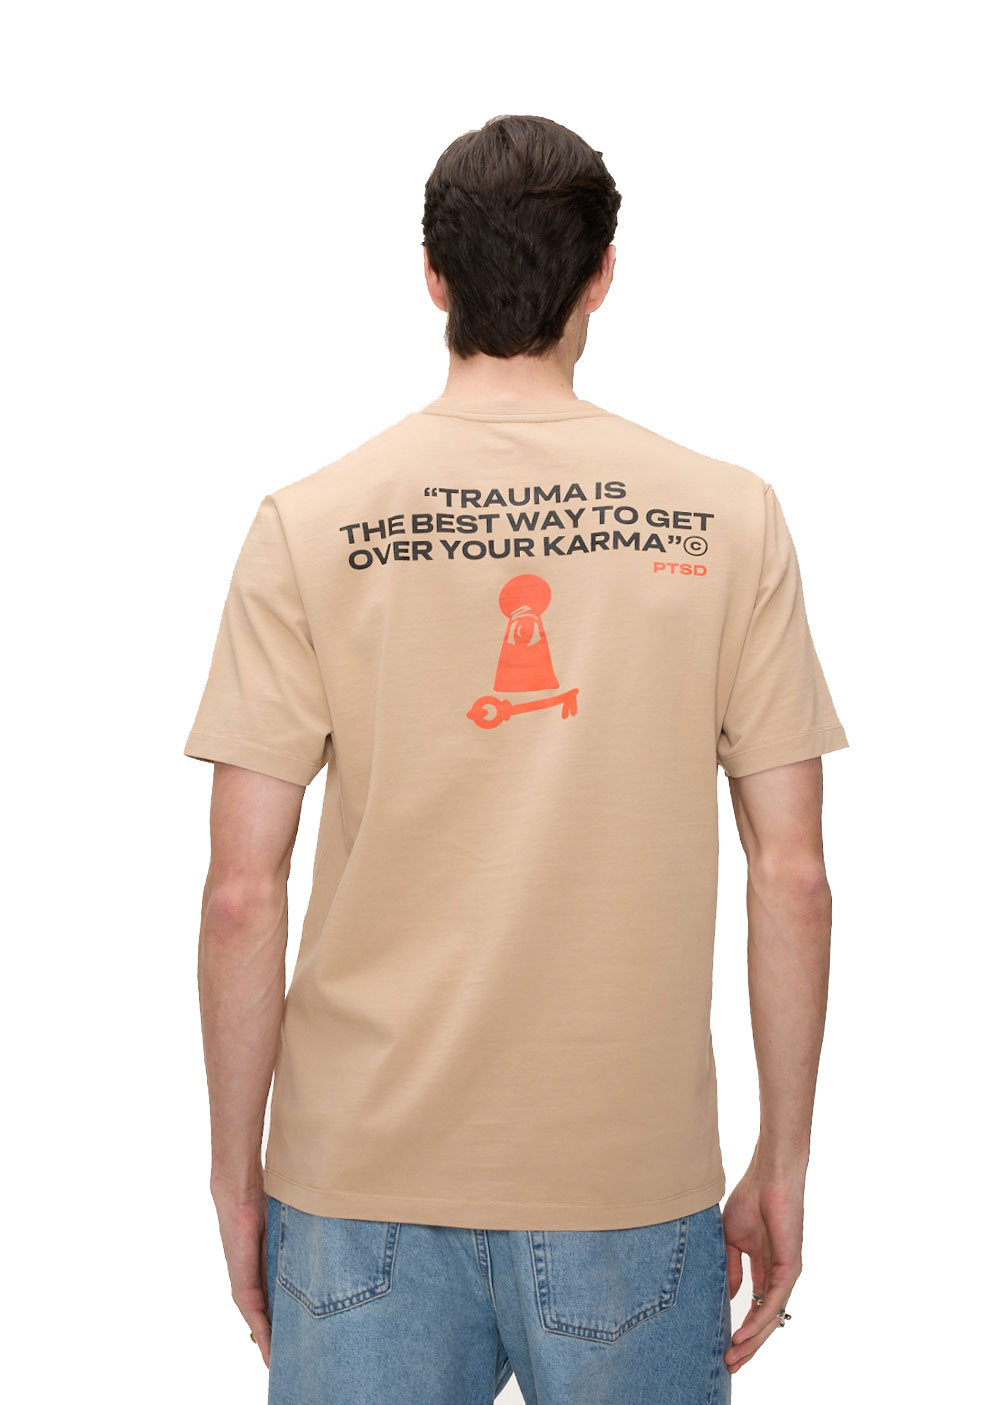 1111 luck ptsd tshirt back design with text "Trauma is the best way to get over your karma"